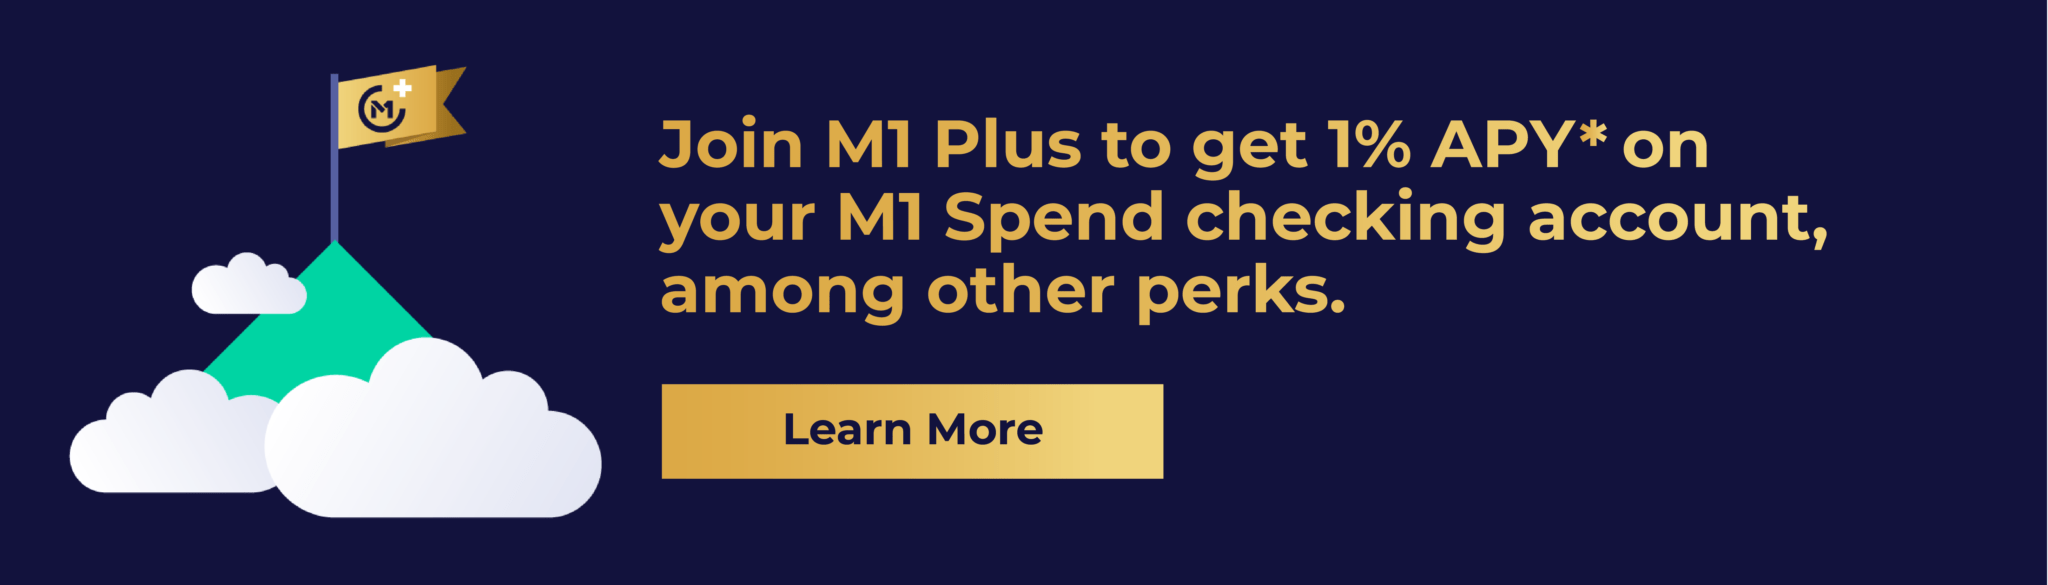 Join M1 Plus to get 1% APY* on your M1 Spend checking account, among other perks.